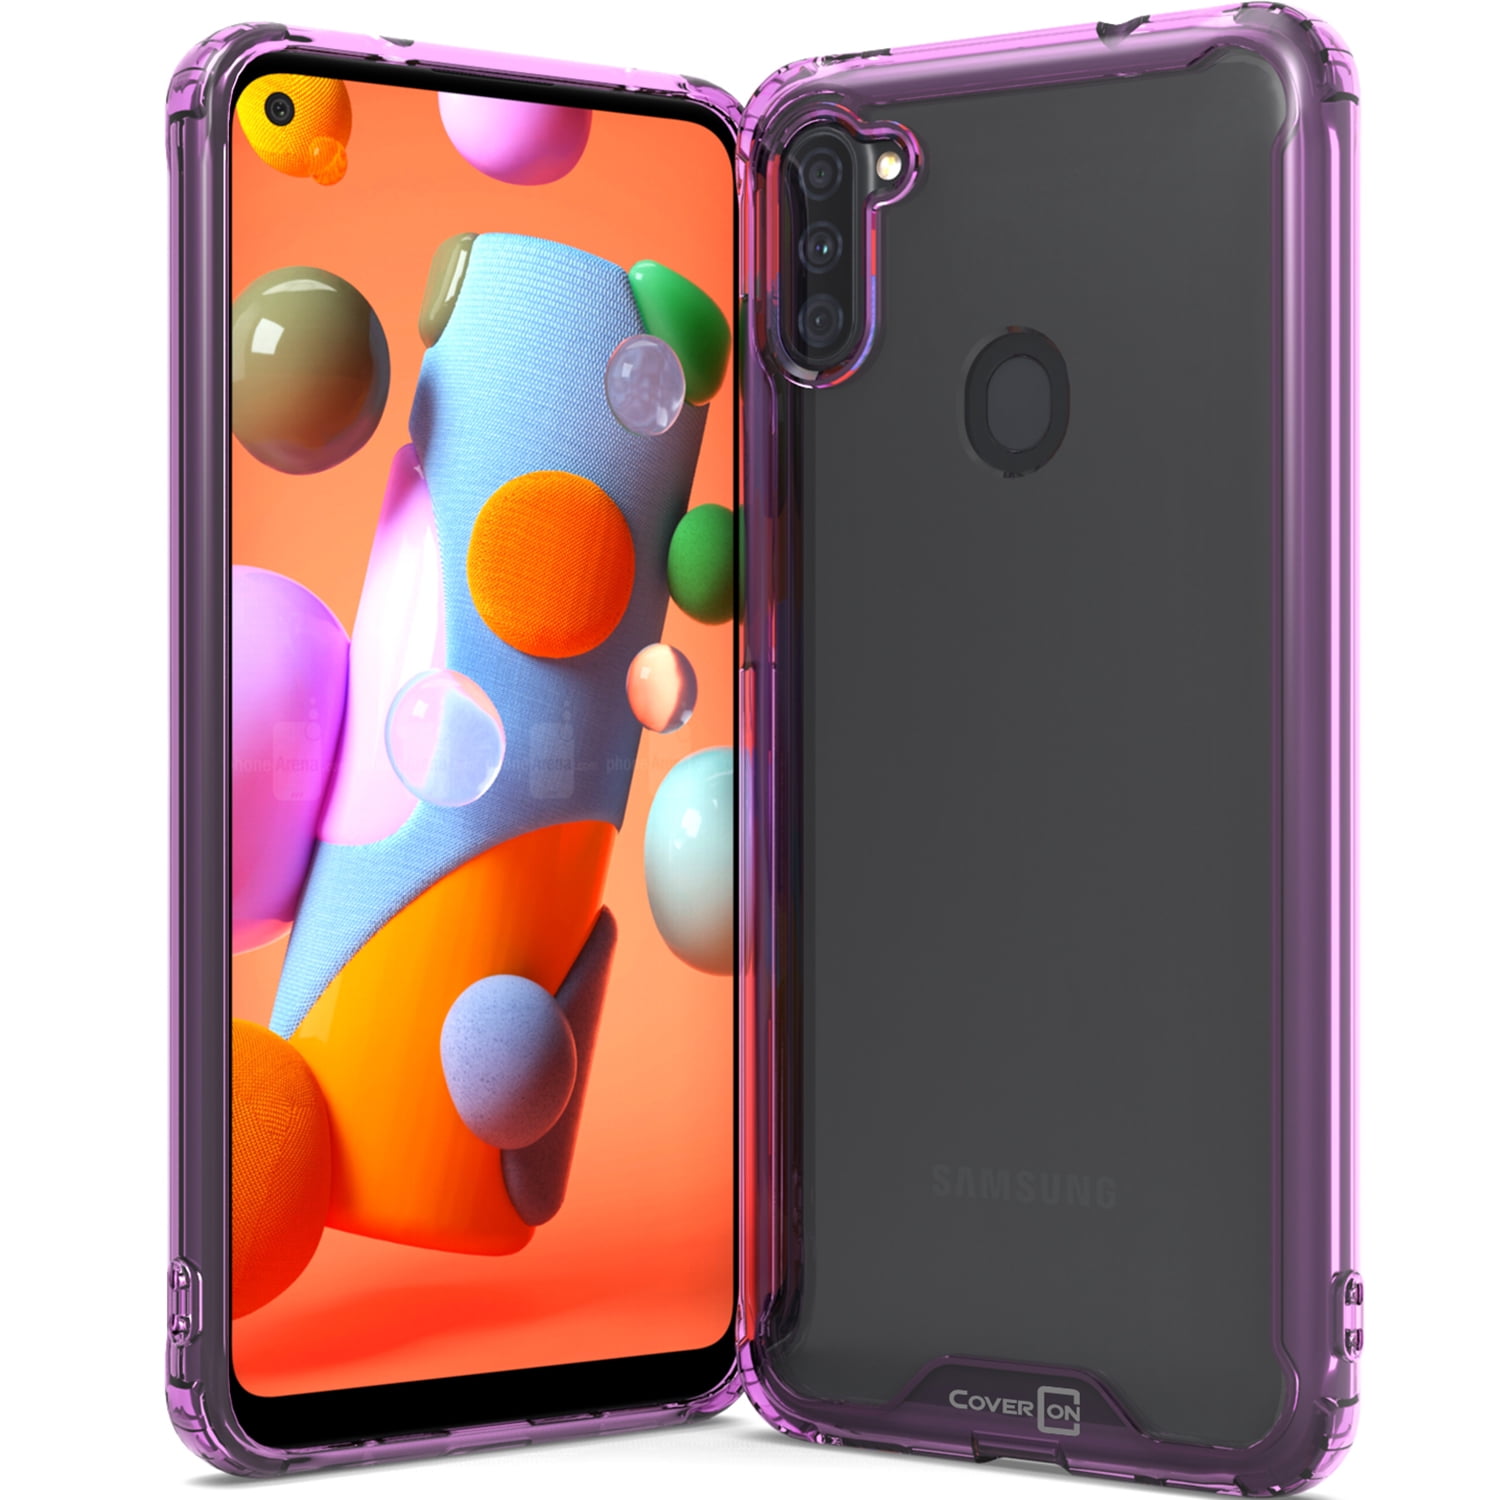 CoverON Samsung Galaxy A11 Case Screen Protector, Clear Slim Lightweight Hard Protective Phone with Tempered Glass, TPU Purple Bumpers - Walmart.com